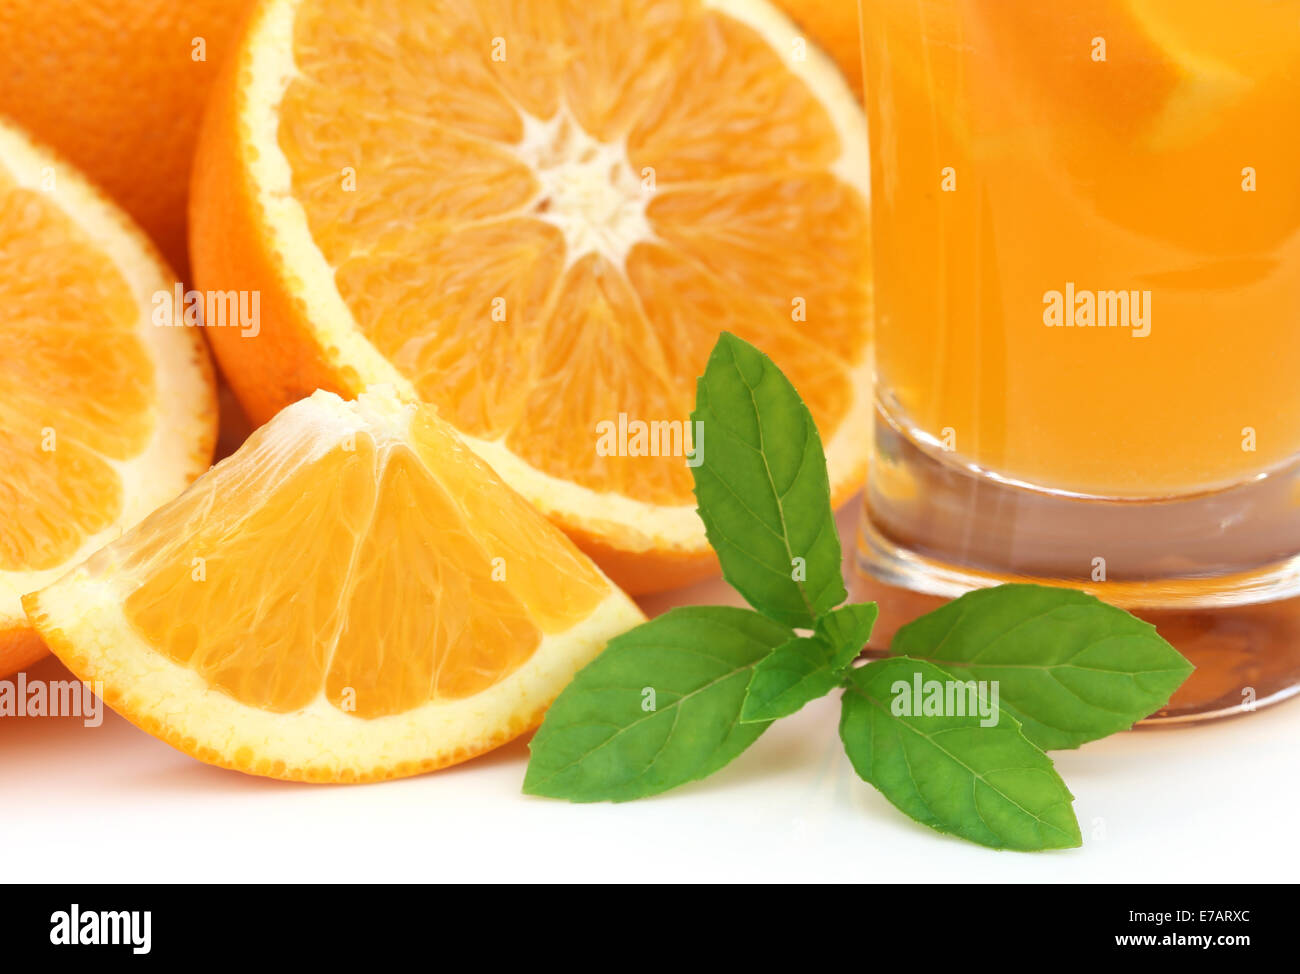 Oranges with glass of juice and green mint leaves Stock Photo